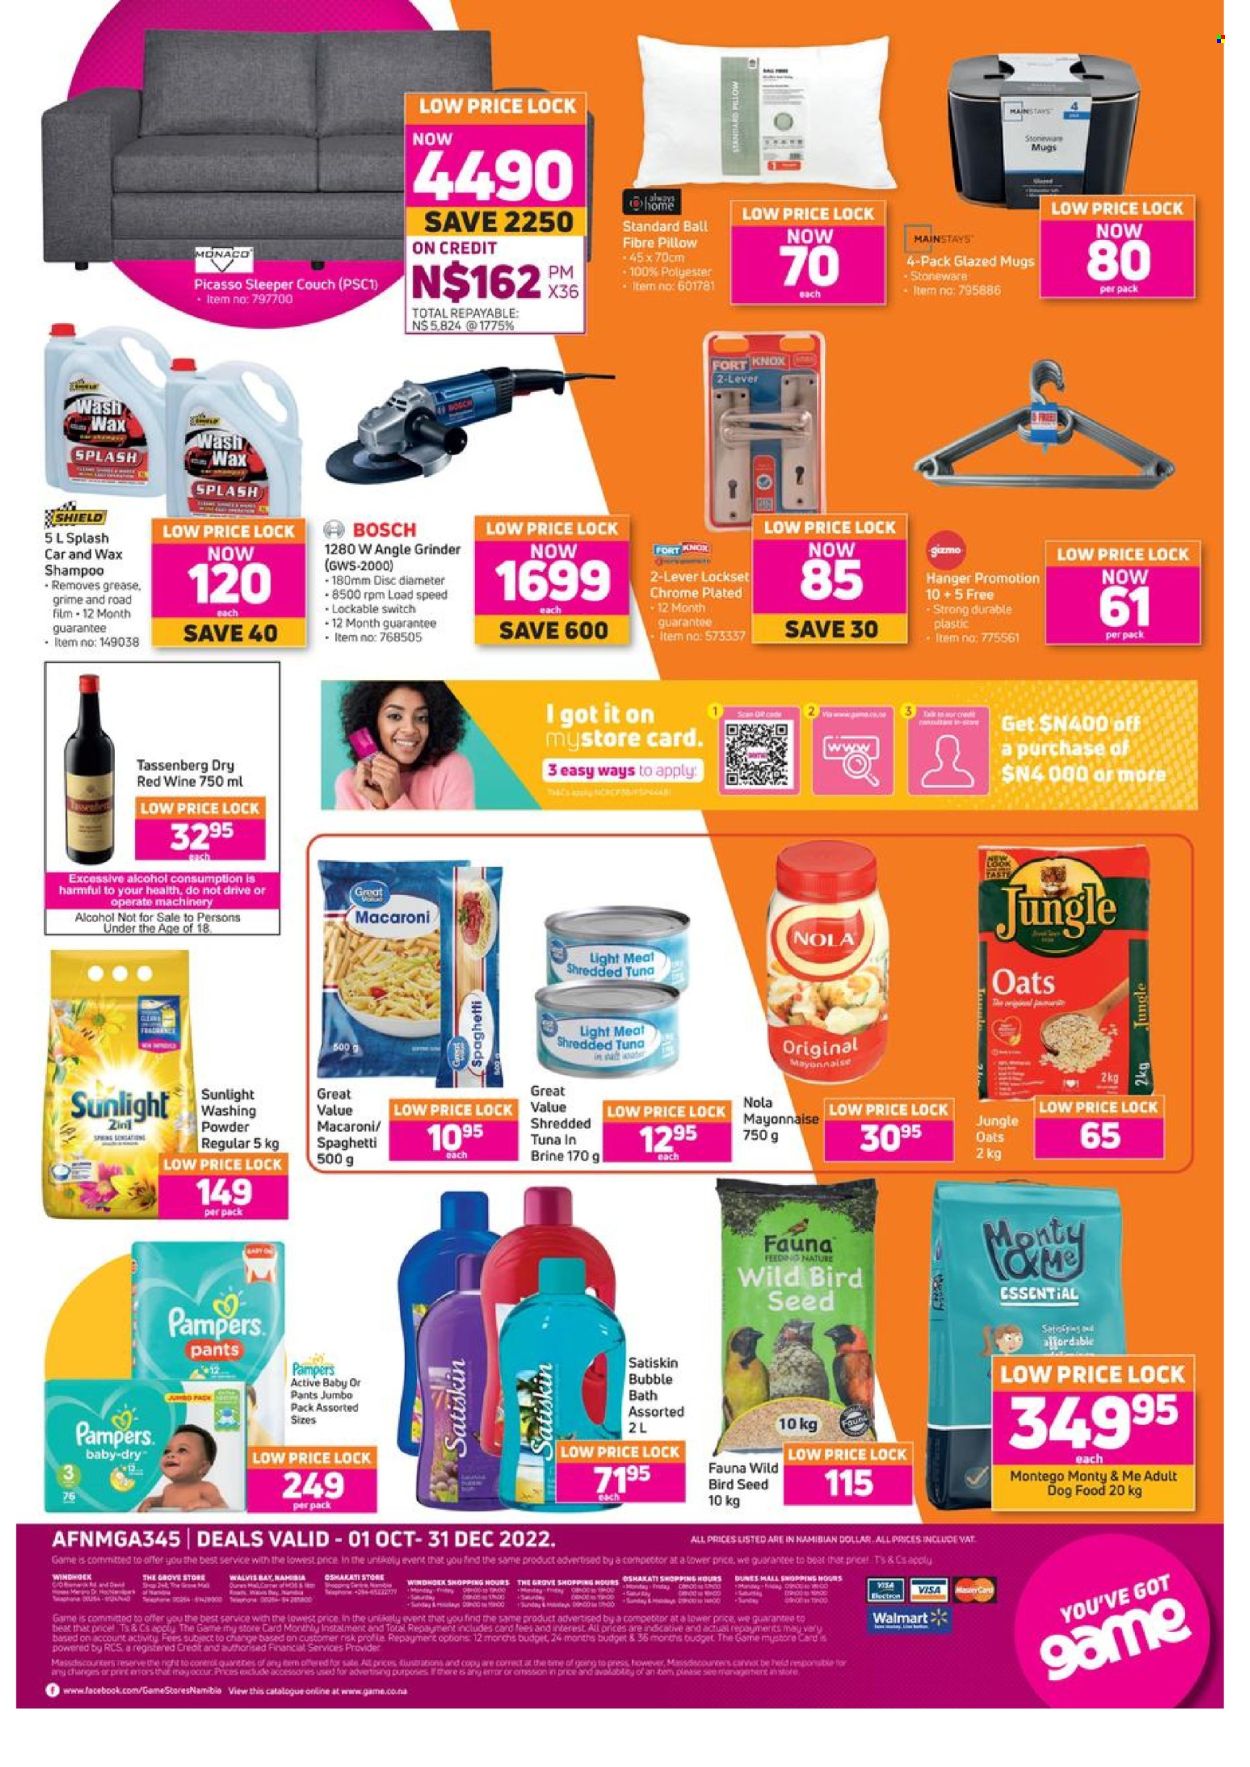 thumbnail - Game catalogue  - 01/10/2022 - 31/12/2022 - Sales products - spaghetti, macaroni, mayonnaise, oats, jungle oats, red wine, wine, alcohol, Pampers, pants, laundry powder, Sunlight, bubble bath, shampoo, Satiskin, fragrance, stoneware, pillow, animal food, bird food, dog food, Bosch, grinder, sofa bed, couch, goal, angle grinder. Page 2.